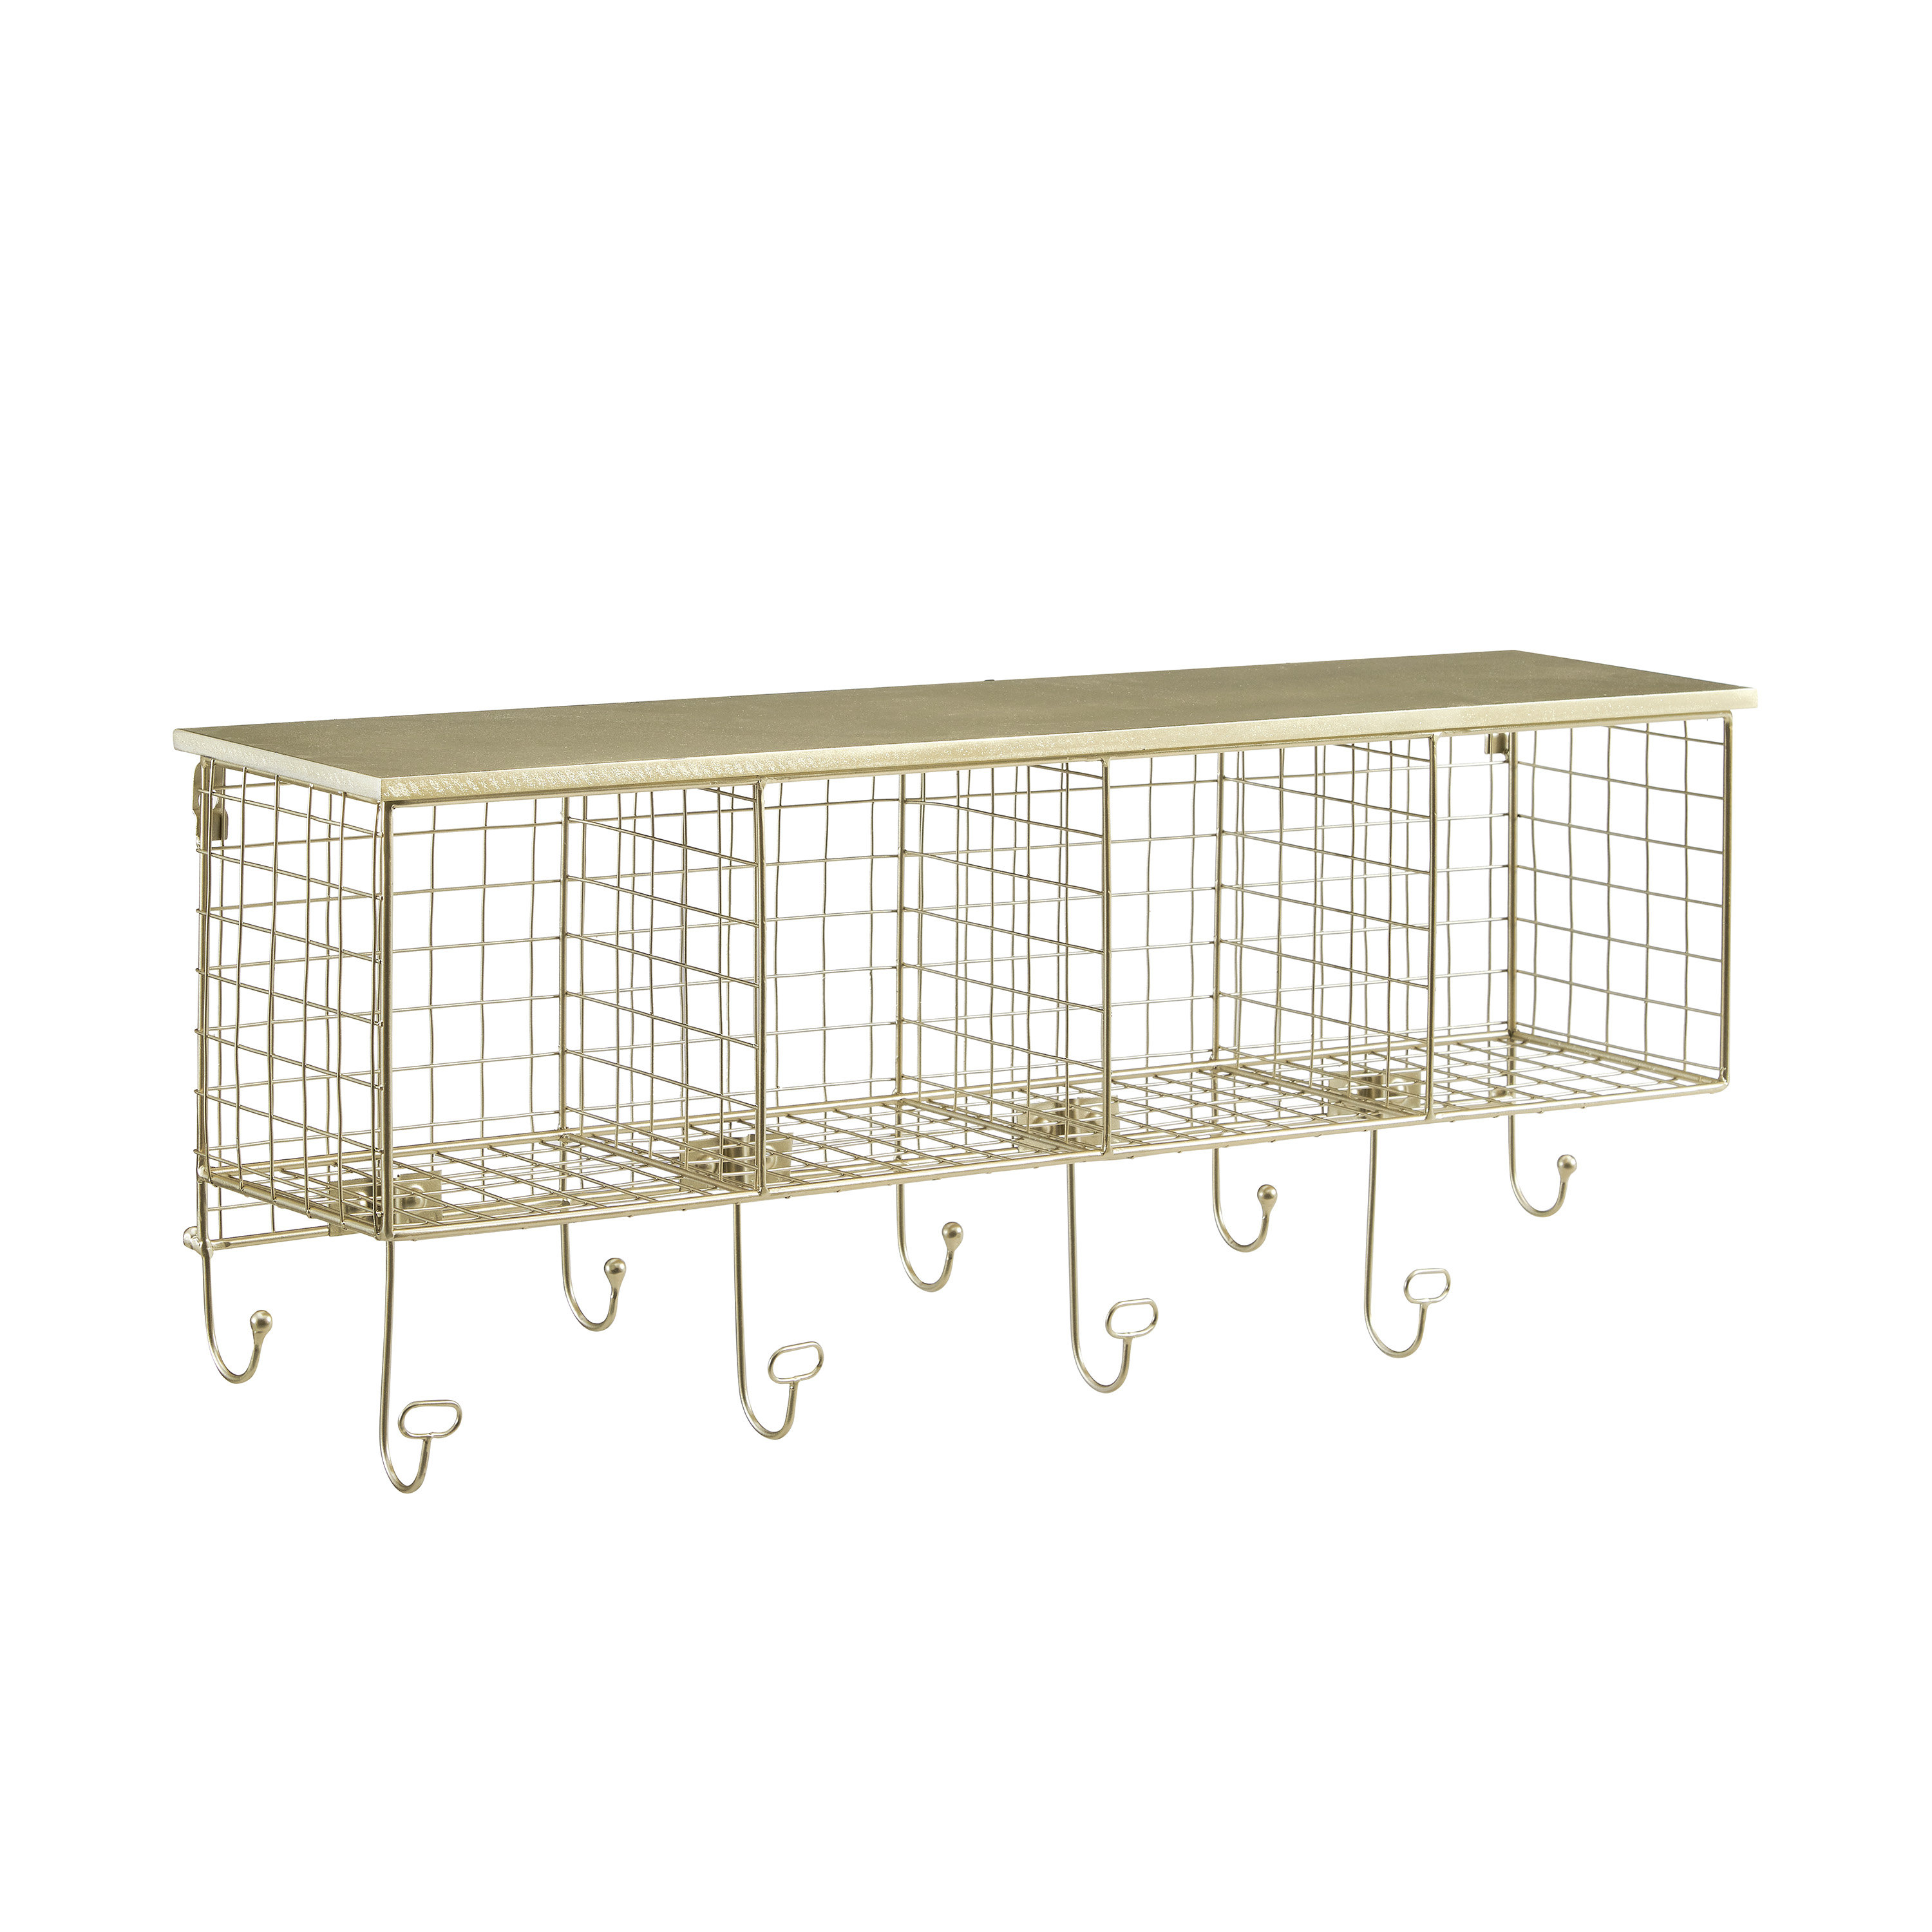 Outen Metal Wall Mounted Coat Rack Trent Austin Design Color: Gold